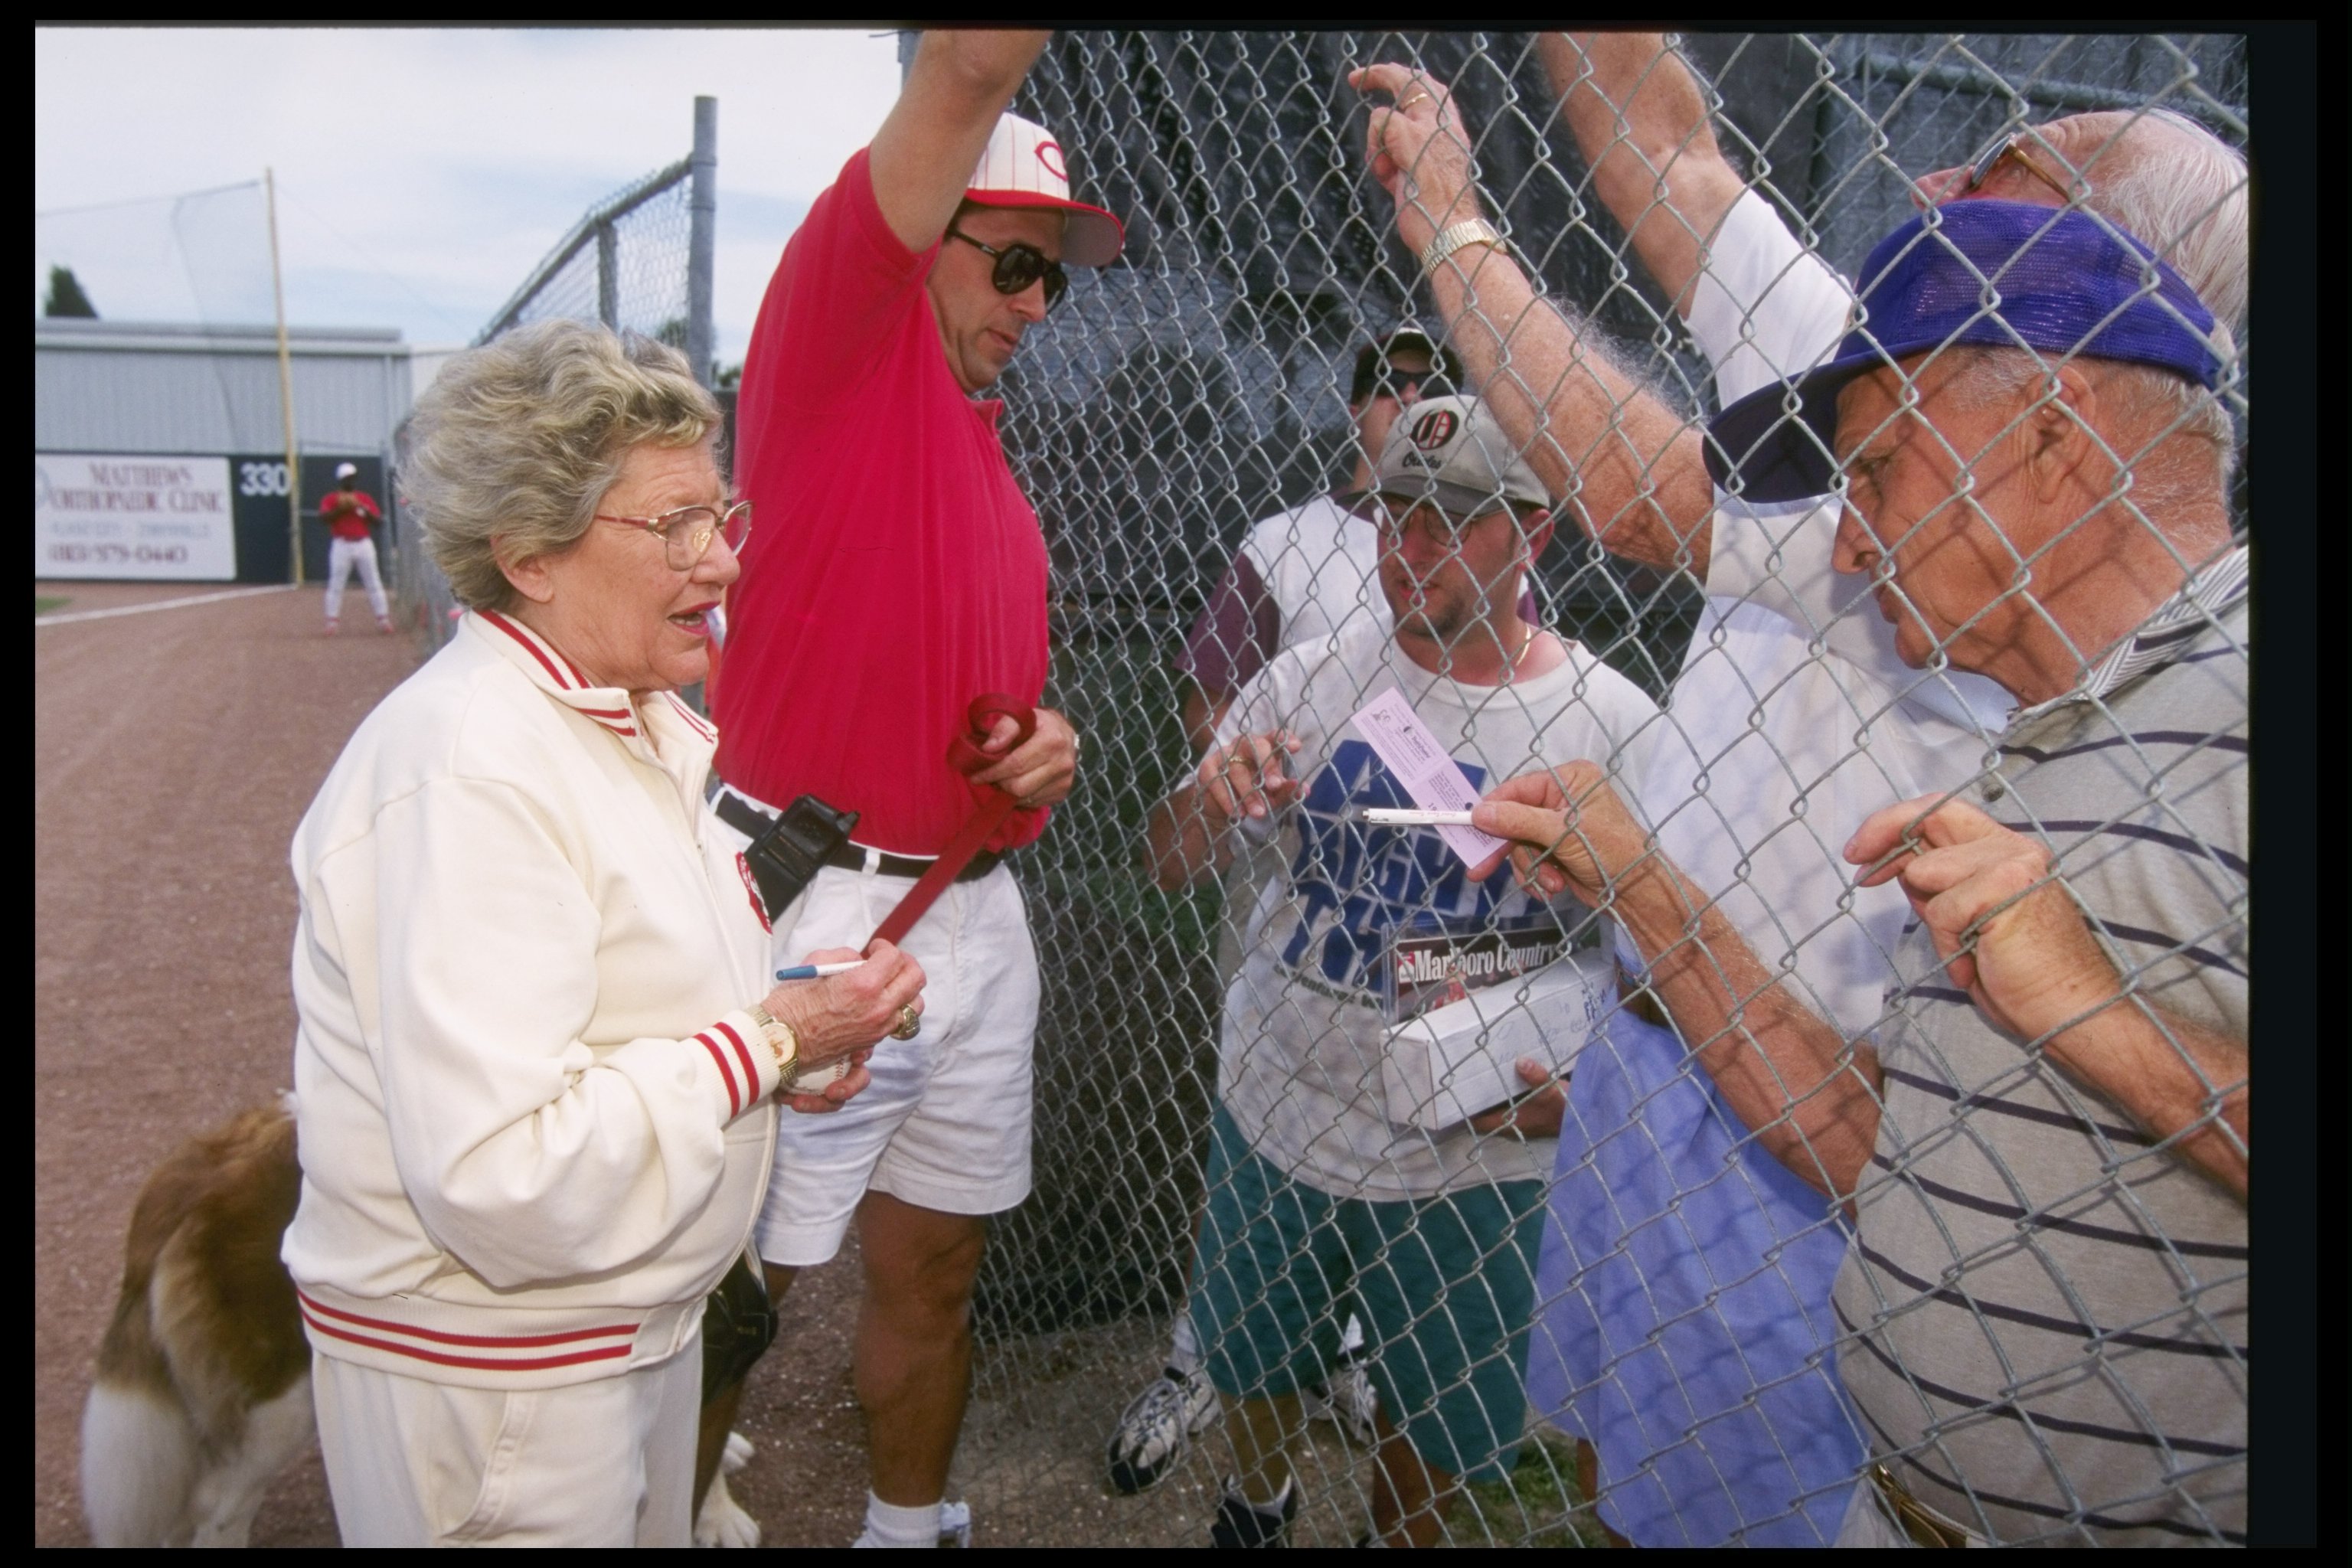 28 Feb 1997:  Cincinnati Reds owner Marge Schott signing autographs  during a spring training game against the Texas Rangers in Plant City, Florida. (photo: Allsport/Getty Images)